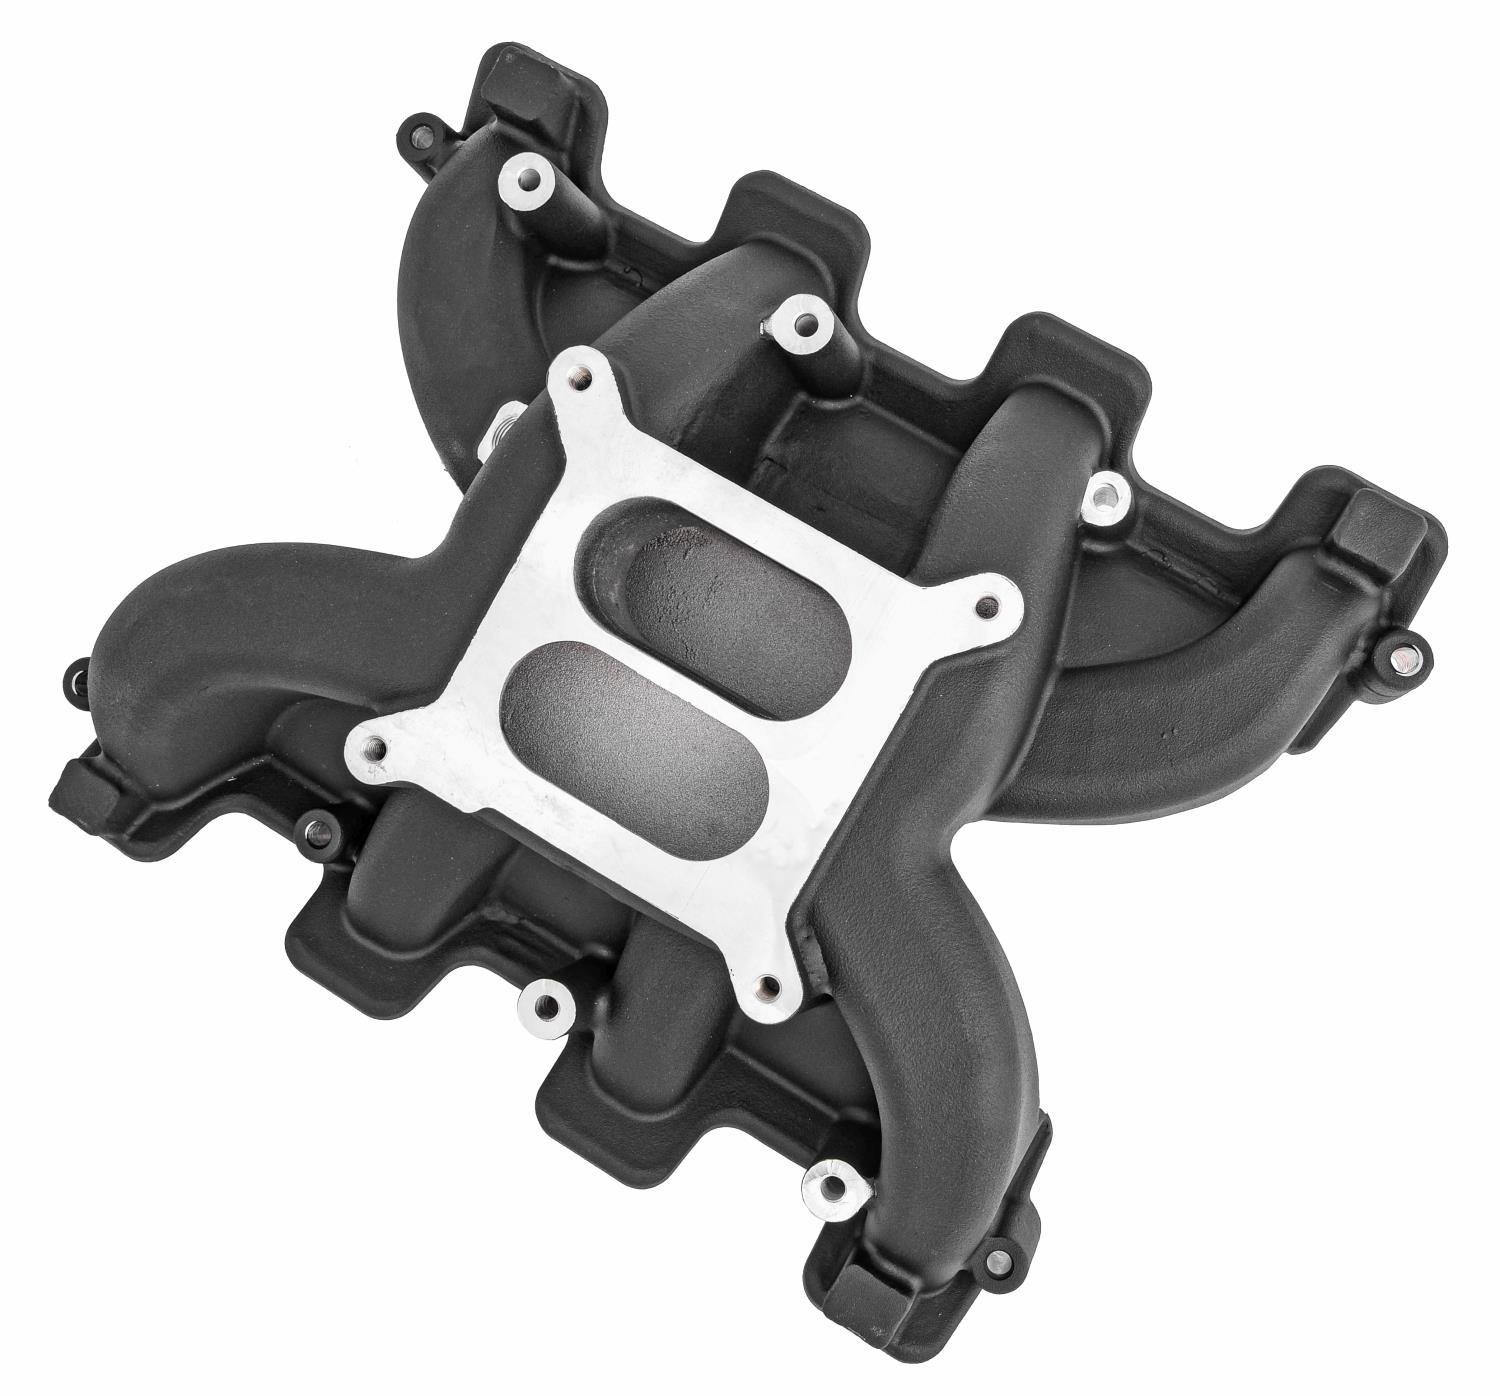 Mid-Rise Dual Plane Intake Manifold for GM LS1/LS2/LS6 with Cathedral Port Heads [Black]